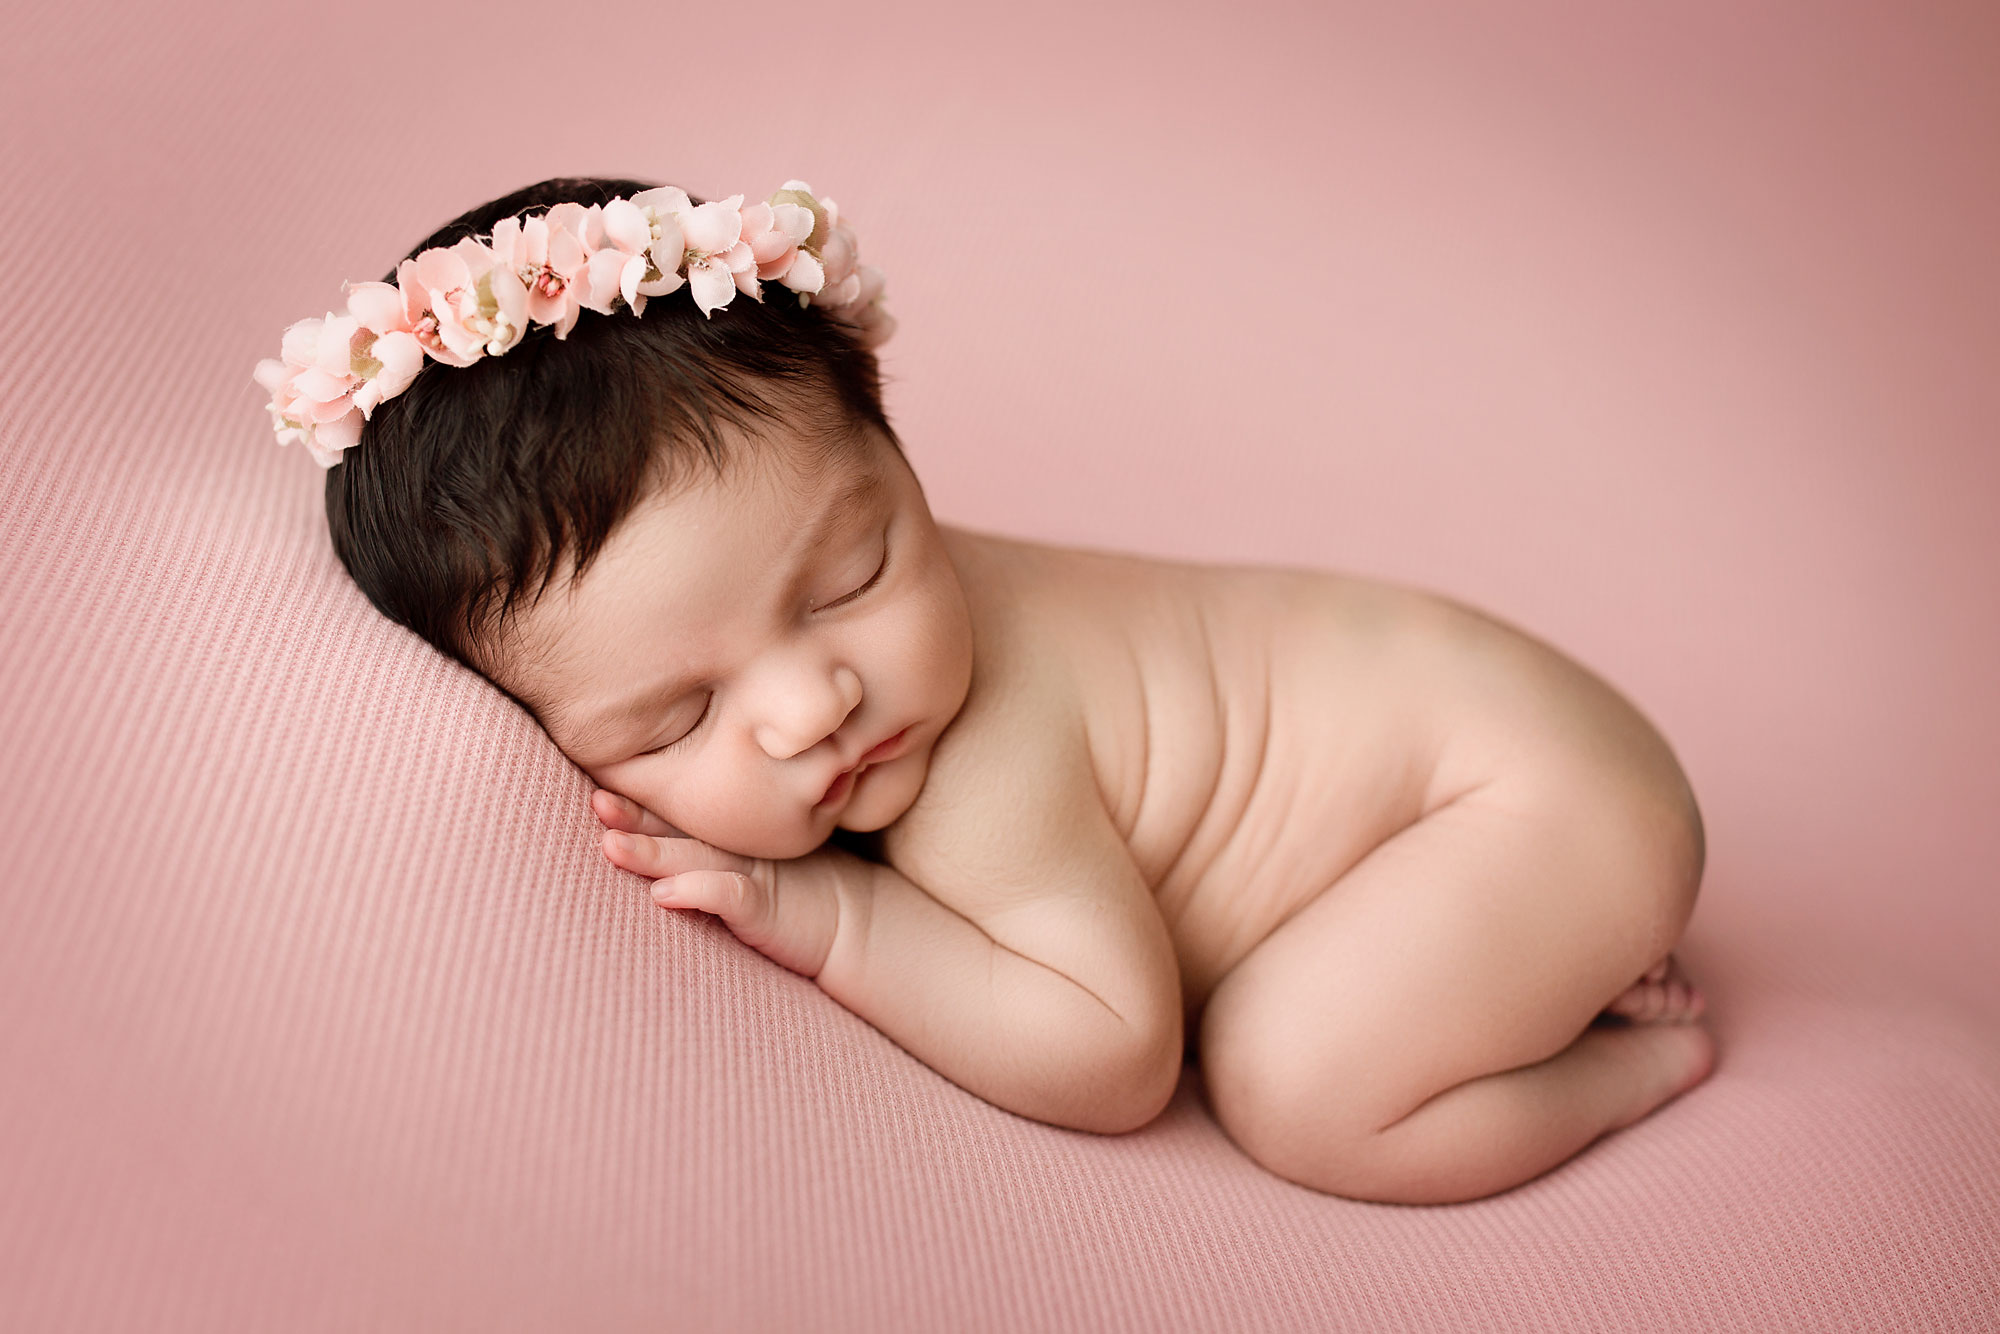 newborn baby girl photo session morris county nj, sleeping baby with flower crown